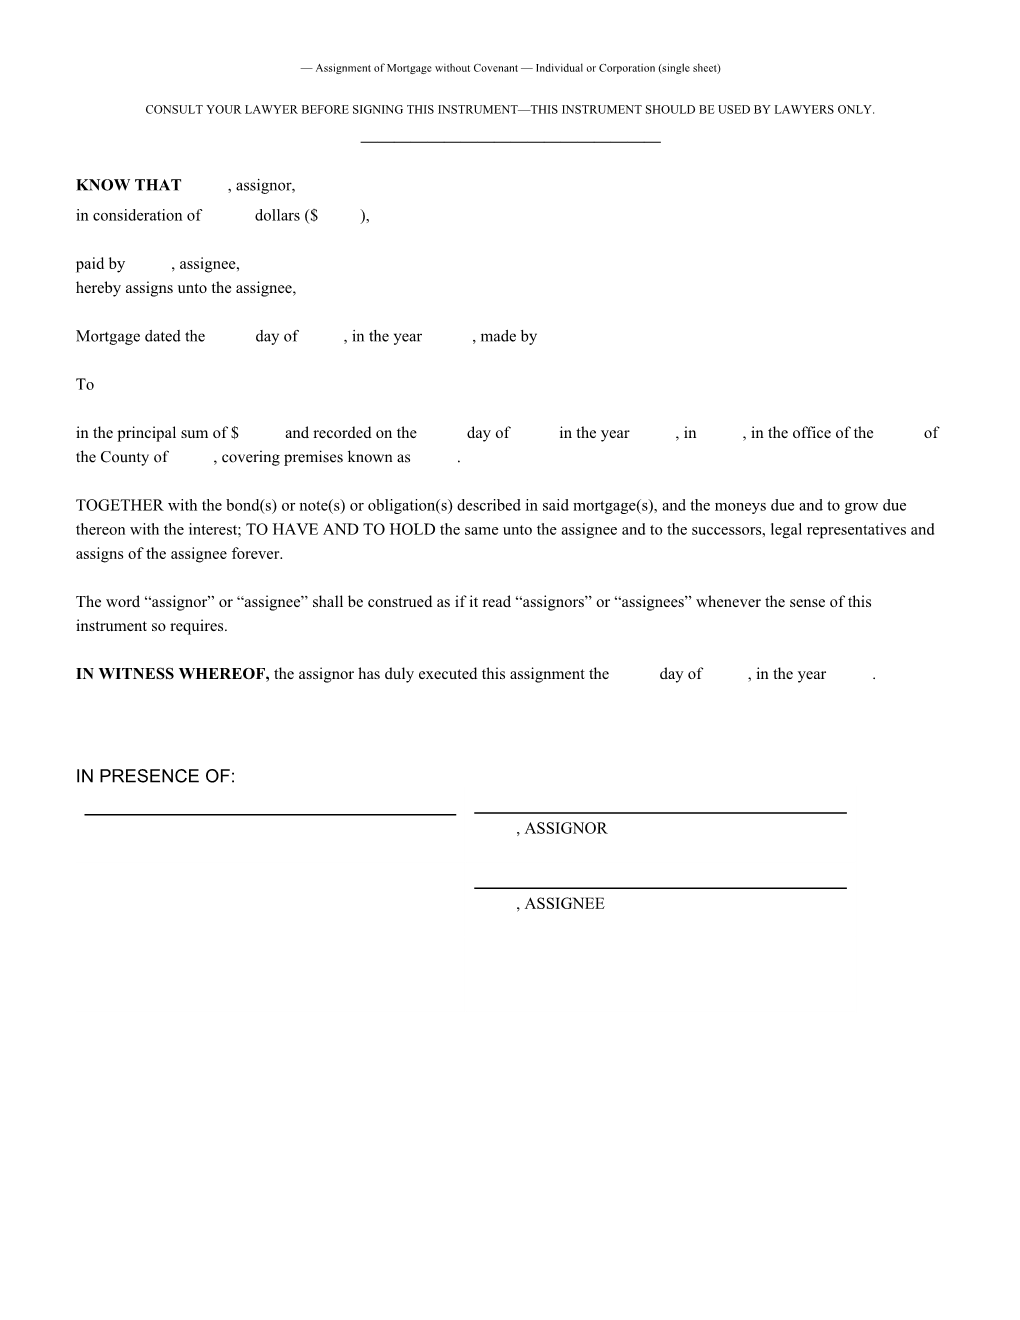 Assignment of Mortgage Without Covenant Individual Or Corporation (Single Sheet)